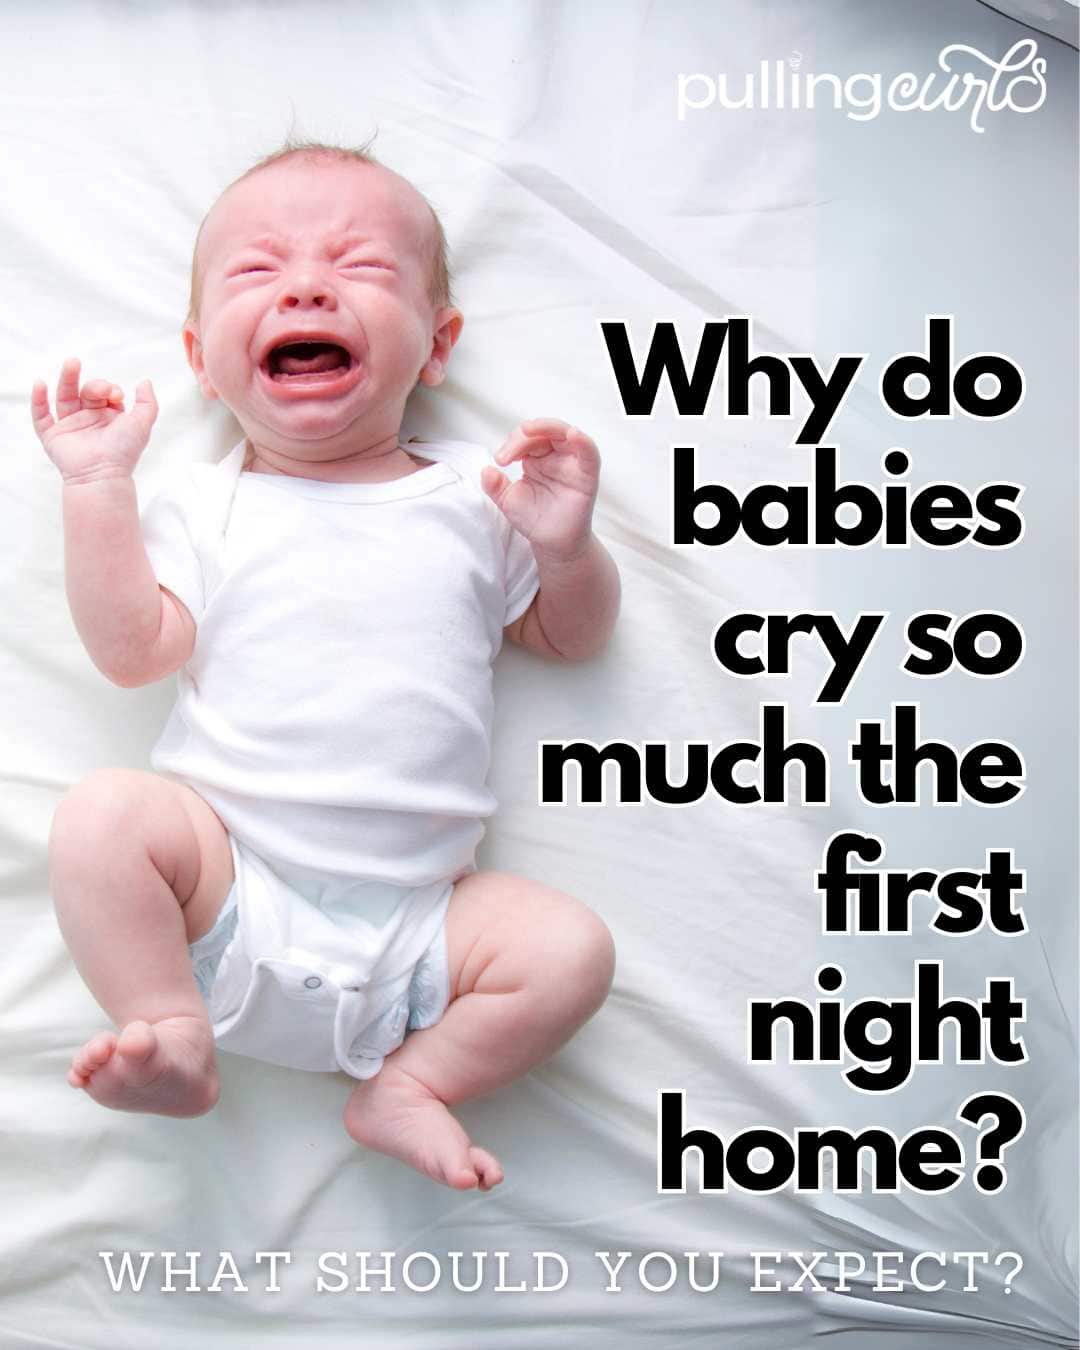 baby crying / why do babies cry so much the first night home / what should you expect? via @pullingcurls